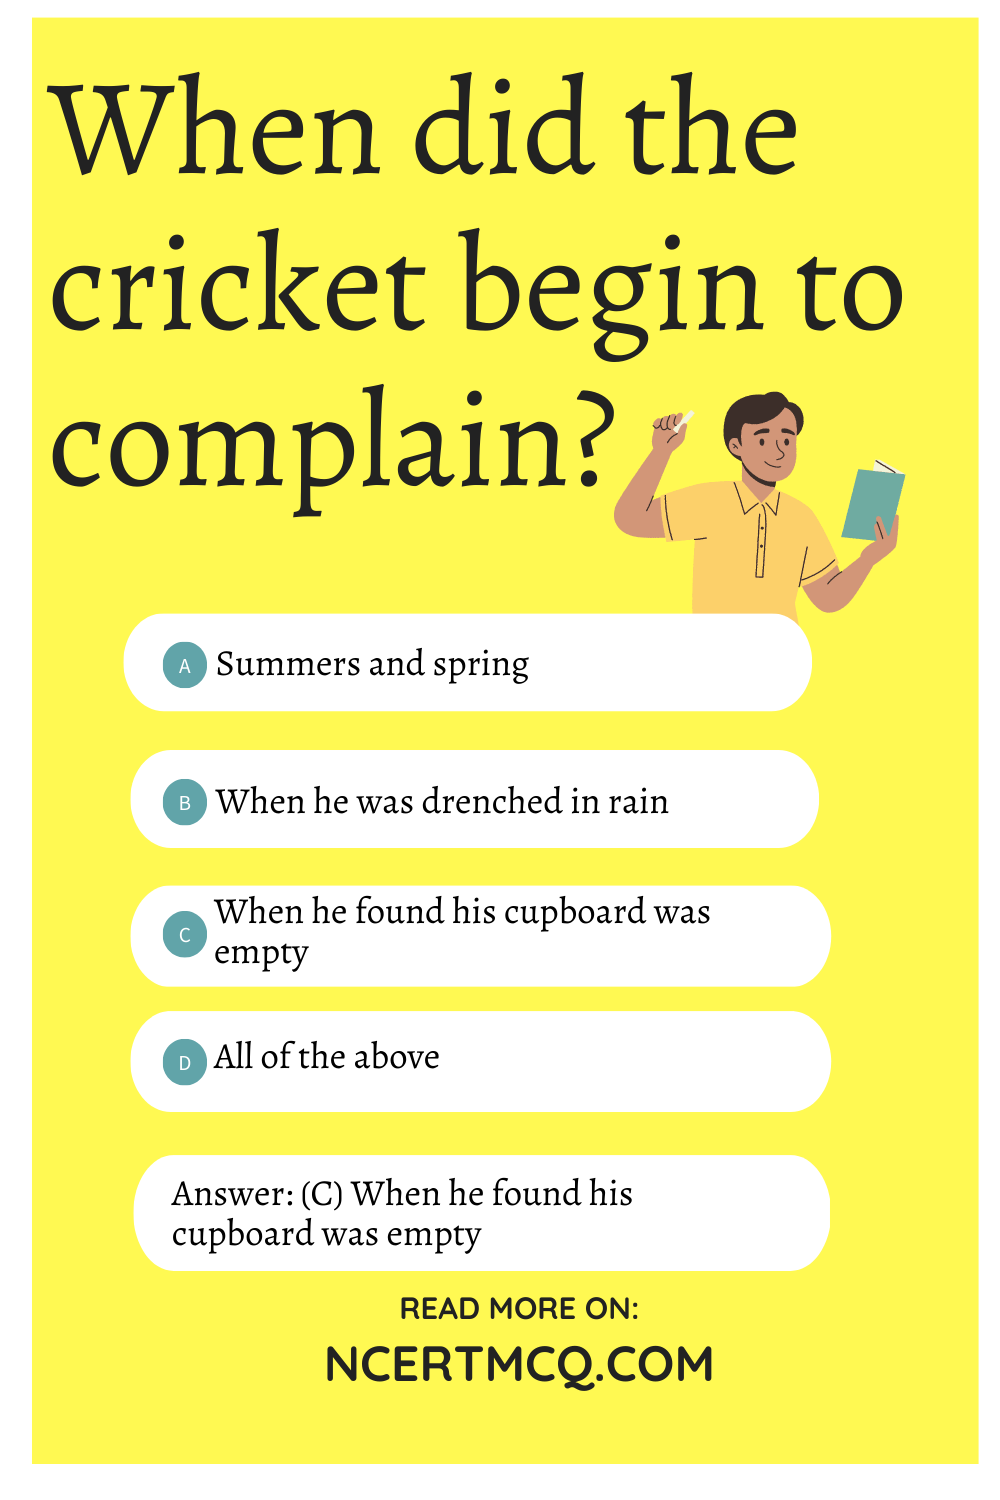 When did the cricket begin to complain?